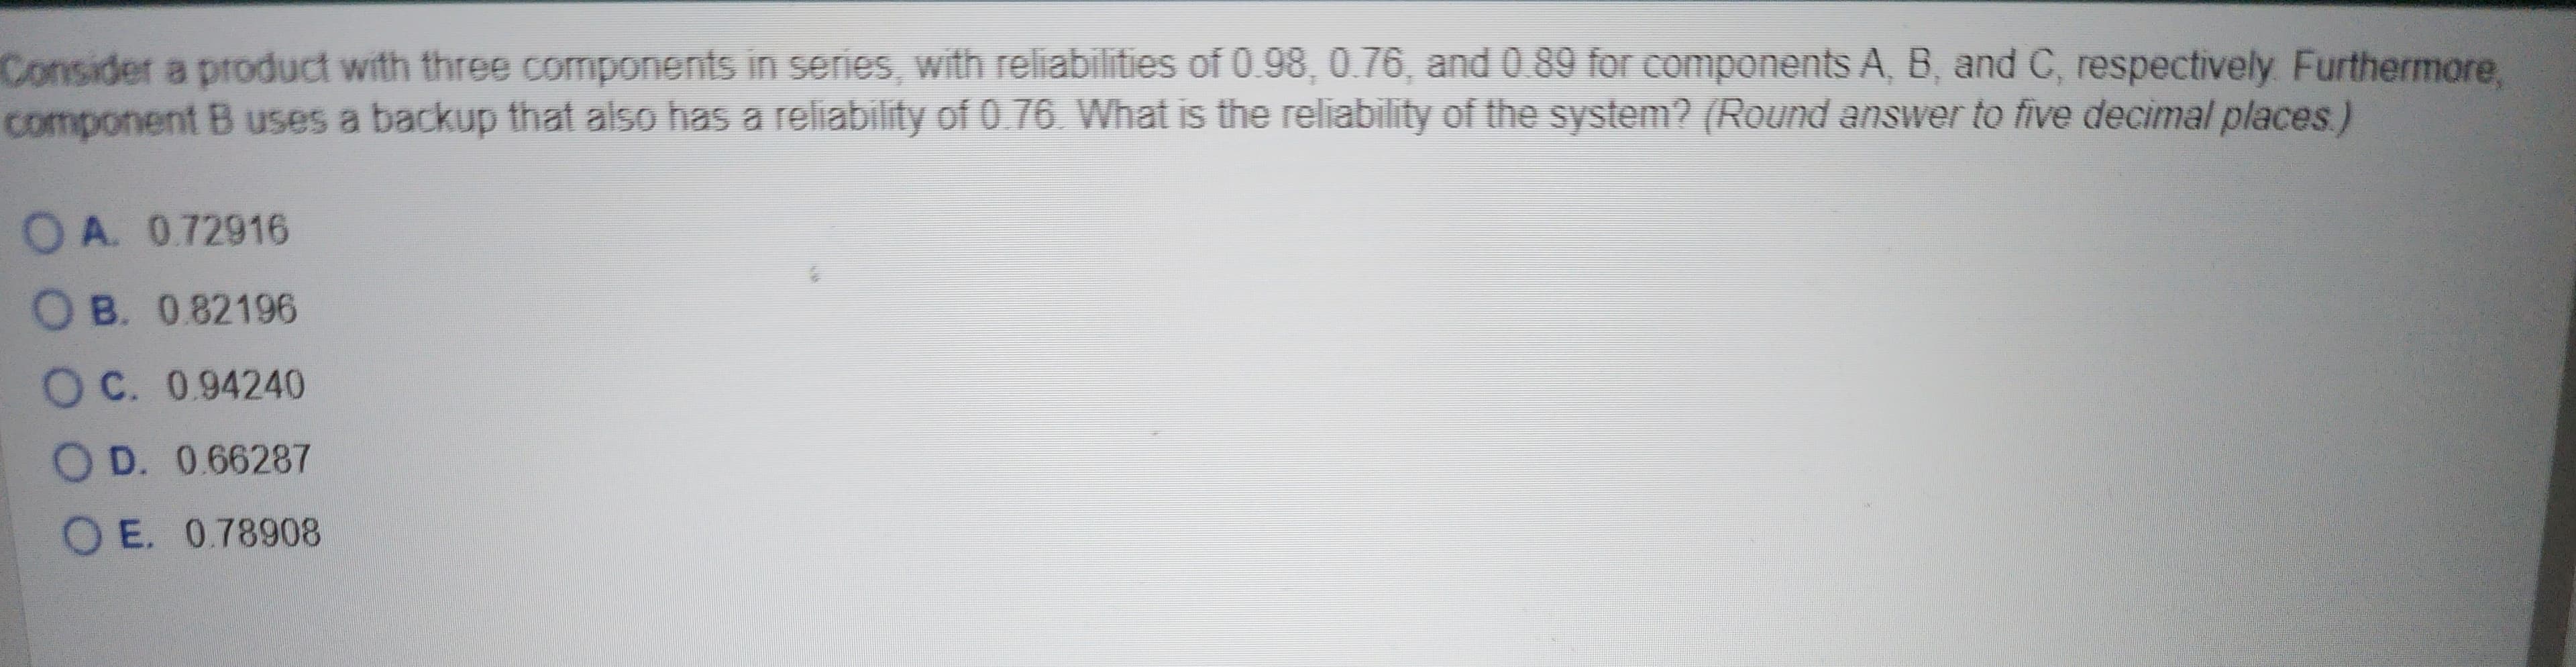 Consider a product with three components in series, with reliabilities of 0.98, 0.76, and 0.89 for components A, B, and C, respectively. Furthermore,
component B uses a backup that also has a reliability of 0.76. What is the reliability of the system? (Round answer to five decimal places.)
OA. 0.72916
OB. 0.82196
OC. 0.94240
OD. 0.66287
OE. 0.78908